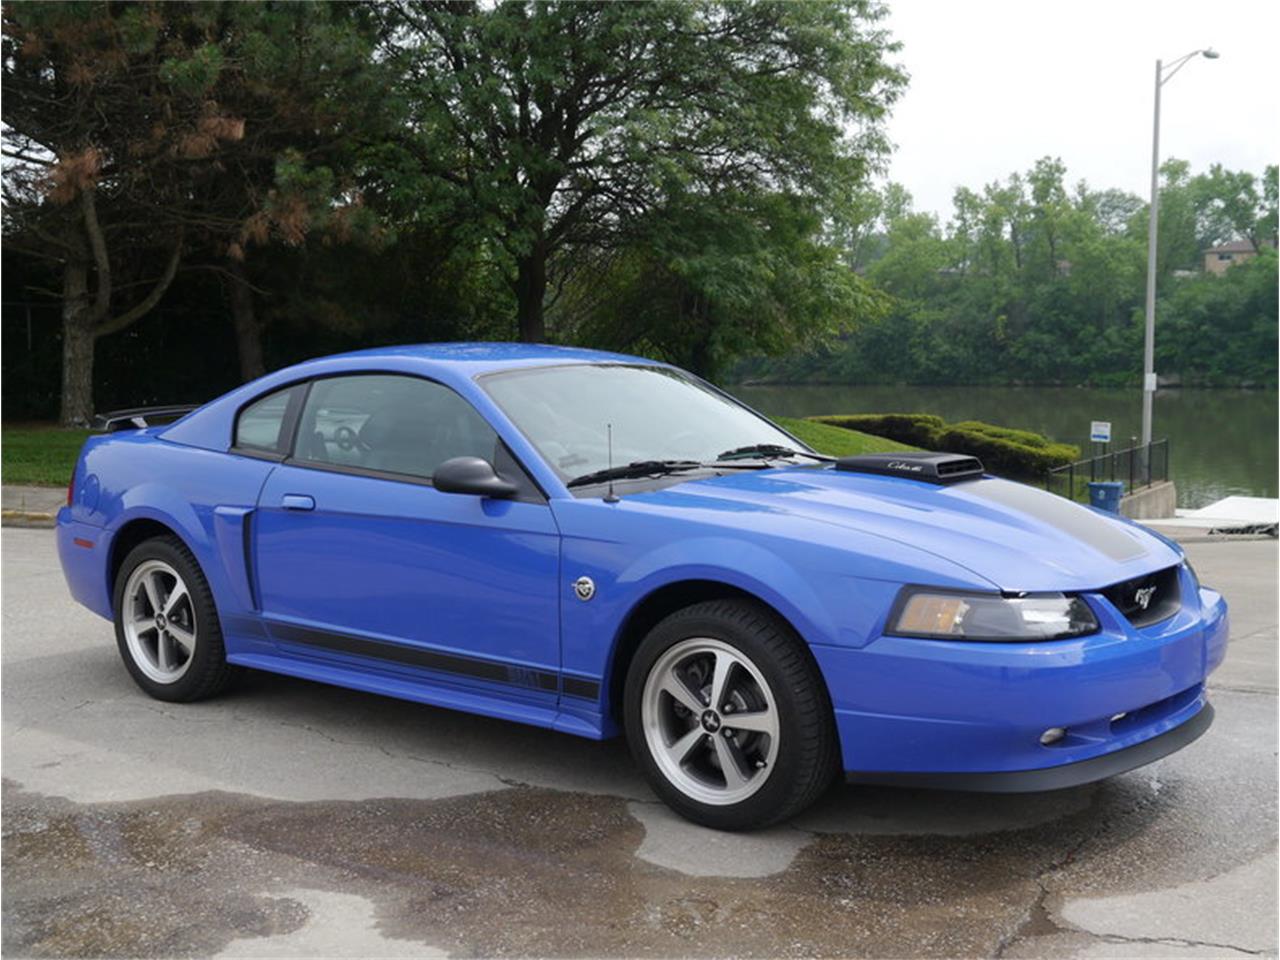 2004 Ford Mustang Mach 1 for Sale | ClassicCars.com | CC-1023912